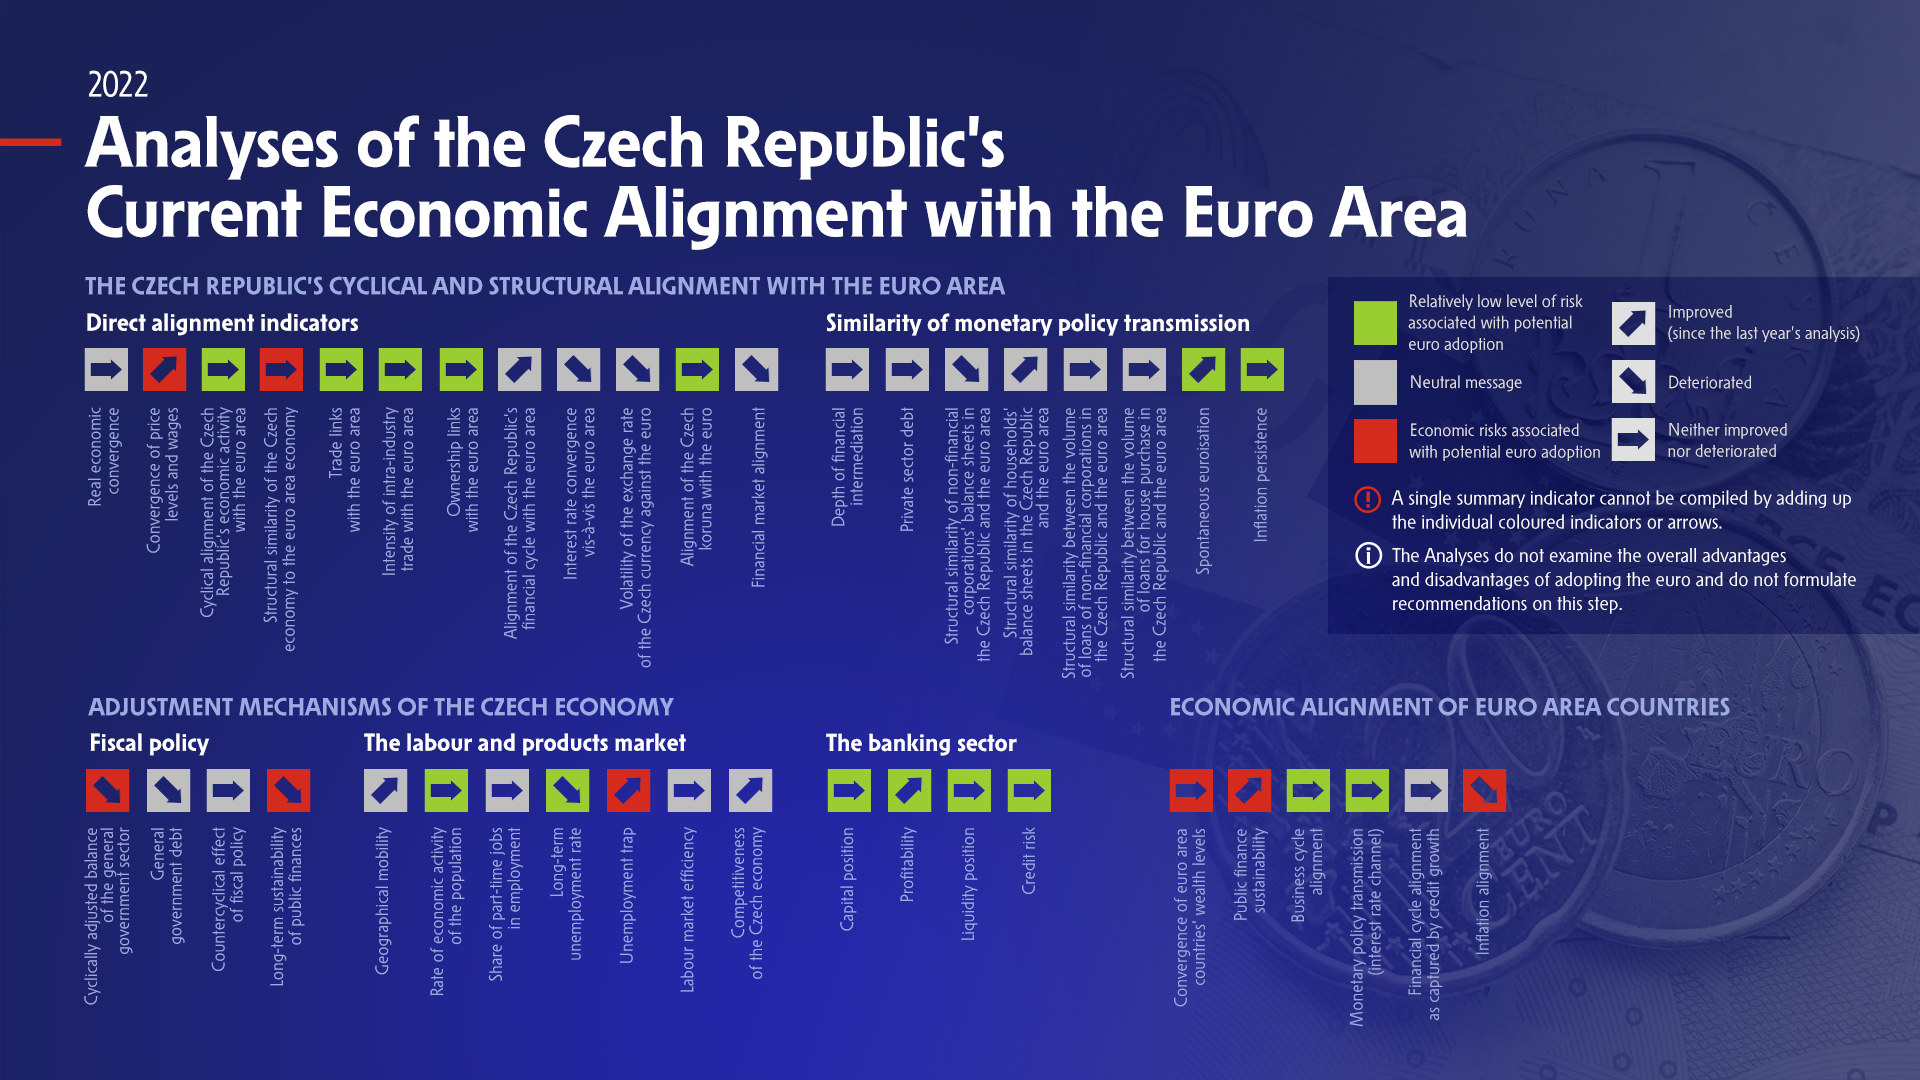 Analyses of the Czech Republic's current economic alignment with the euro area